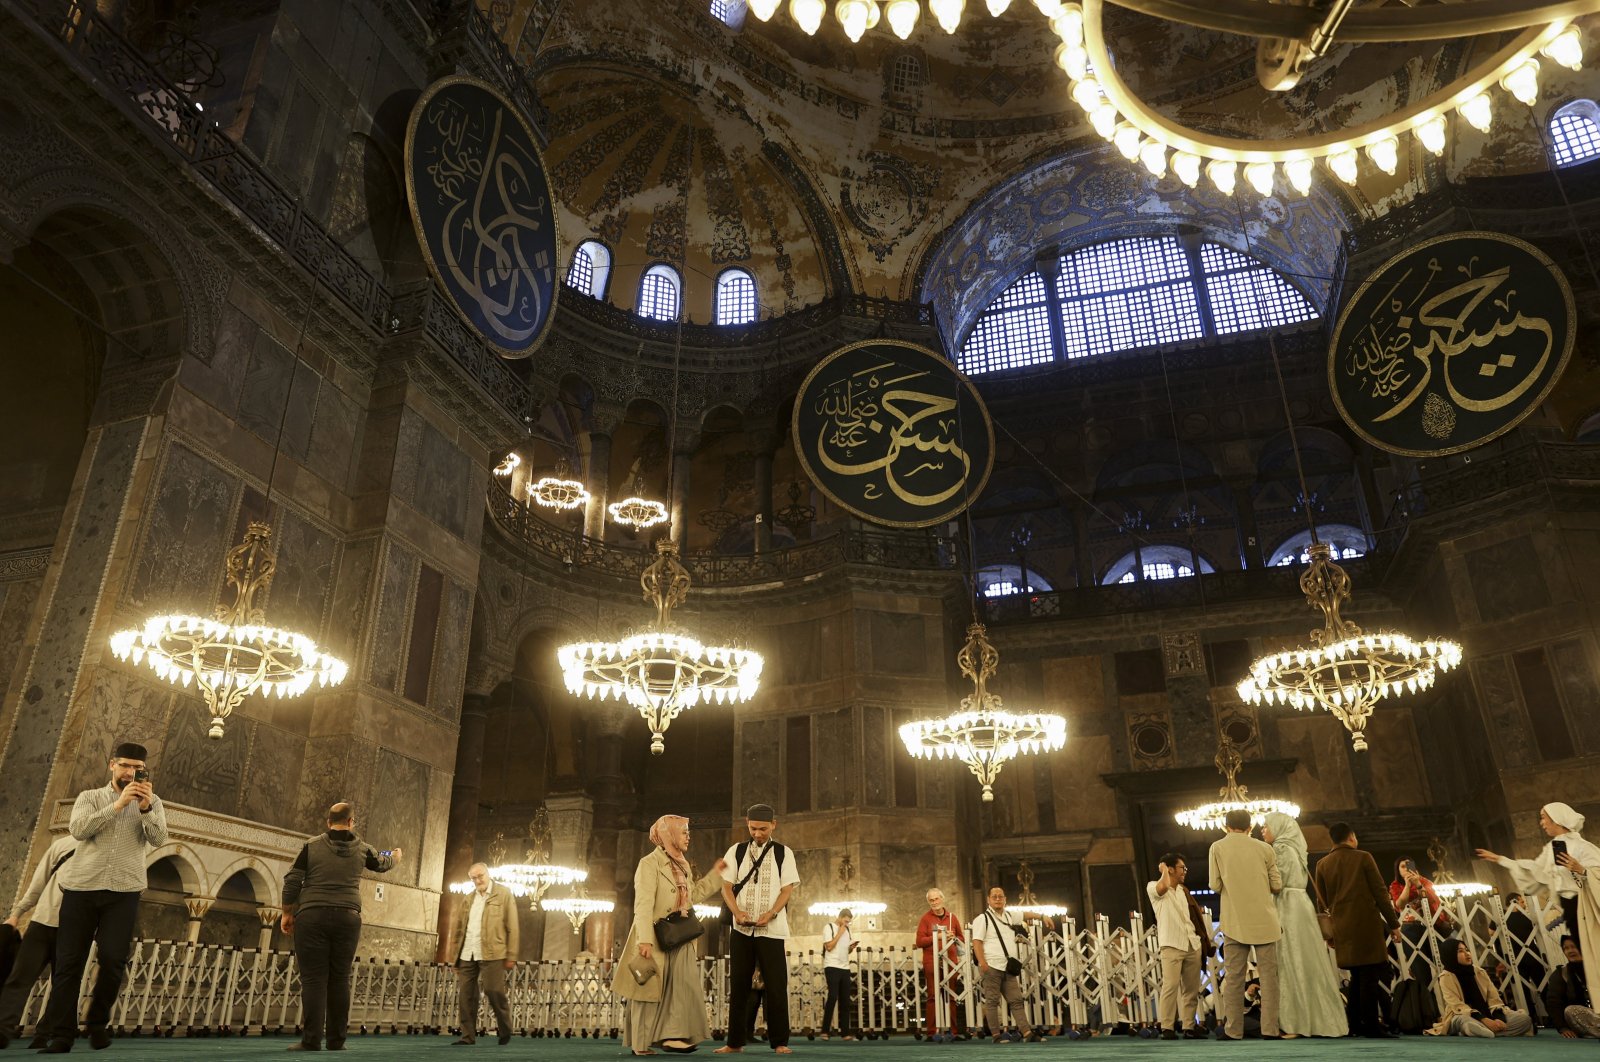 The preparations for the restoration of Hagia Sophia Grand Mosque, one of the most valuable works in the world in terms of its artistic and architectural significance, have been completed before the restoration of its main structure, Istanbul, Türkiye, Oct. 27, 2023. (AA Photo)